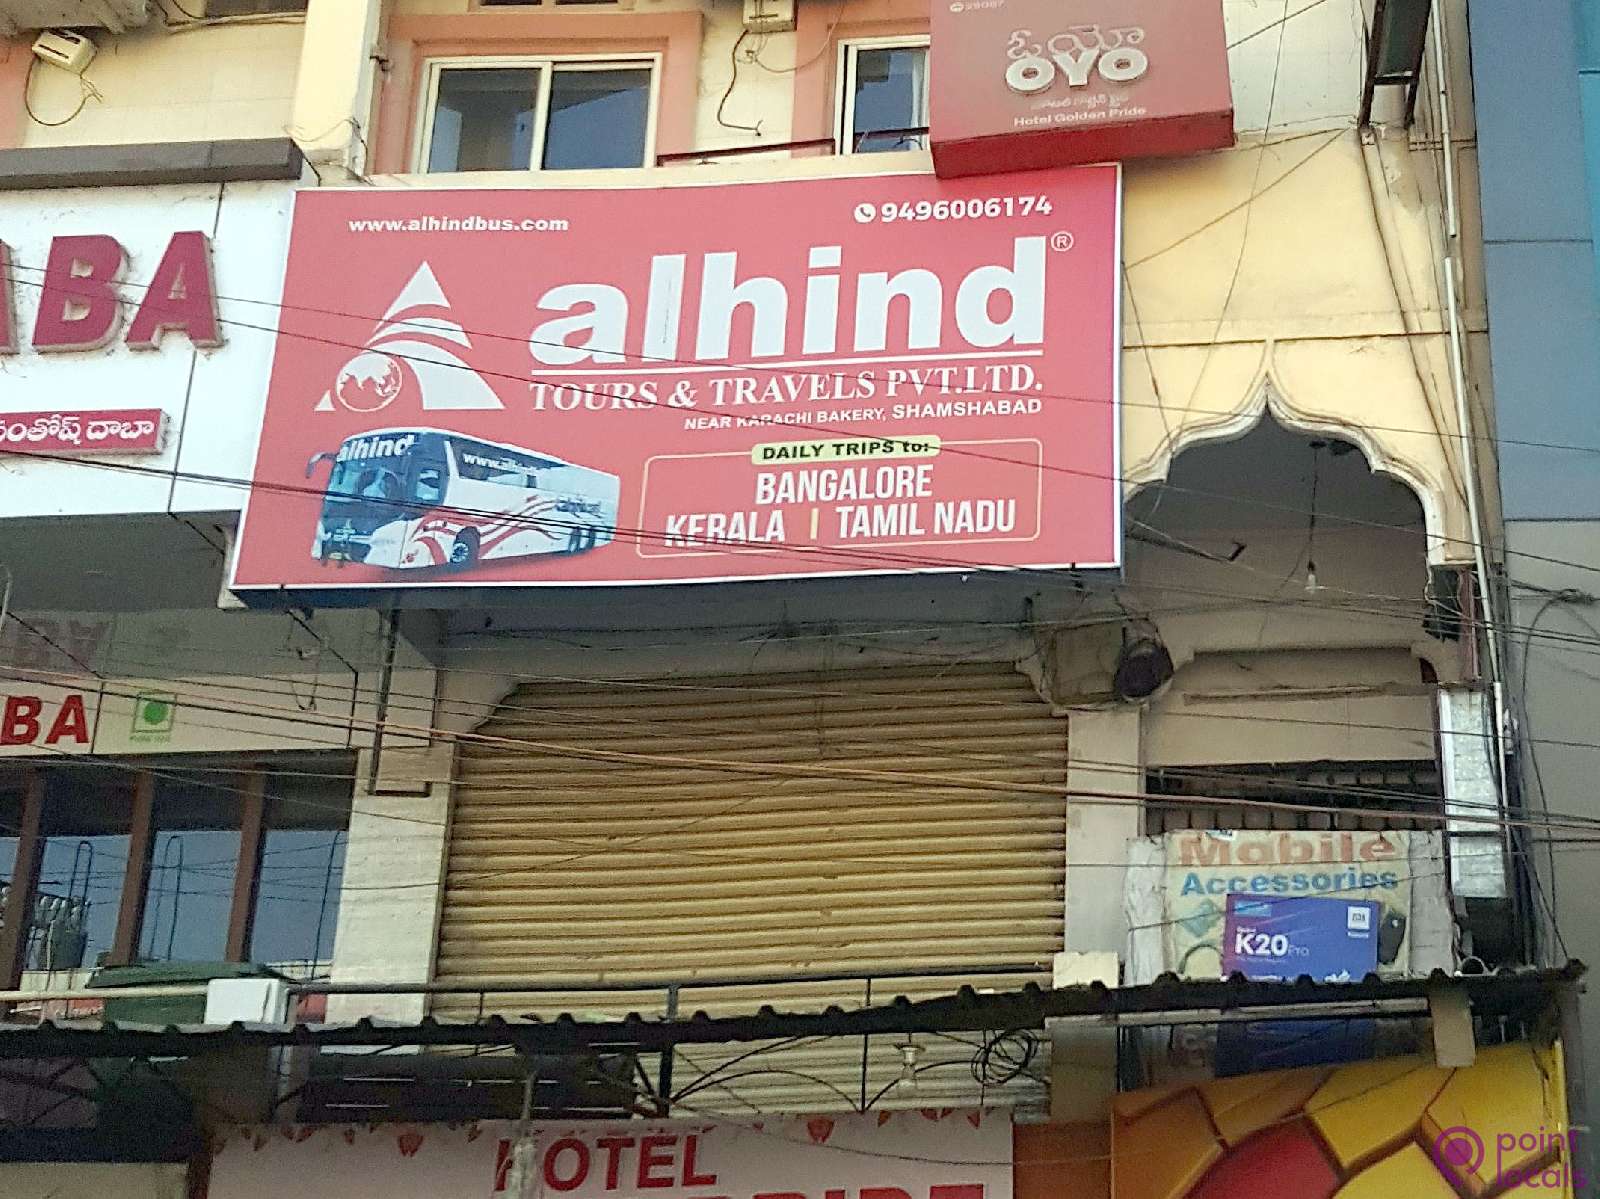 Alhind Tours And Travels Pvt Ltd (Temporary Closed Down) in  Mehdipatnam,Hyderabad - Best Travel Agents in Hyderabad - Justdial